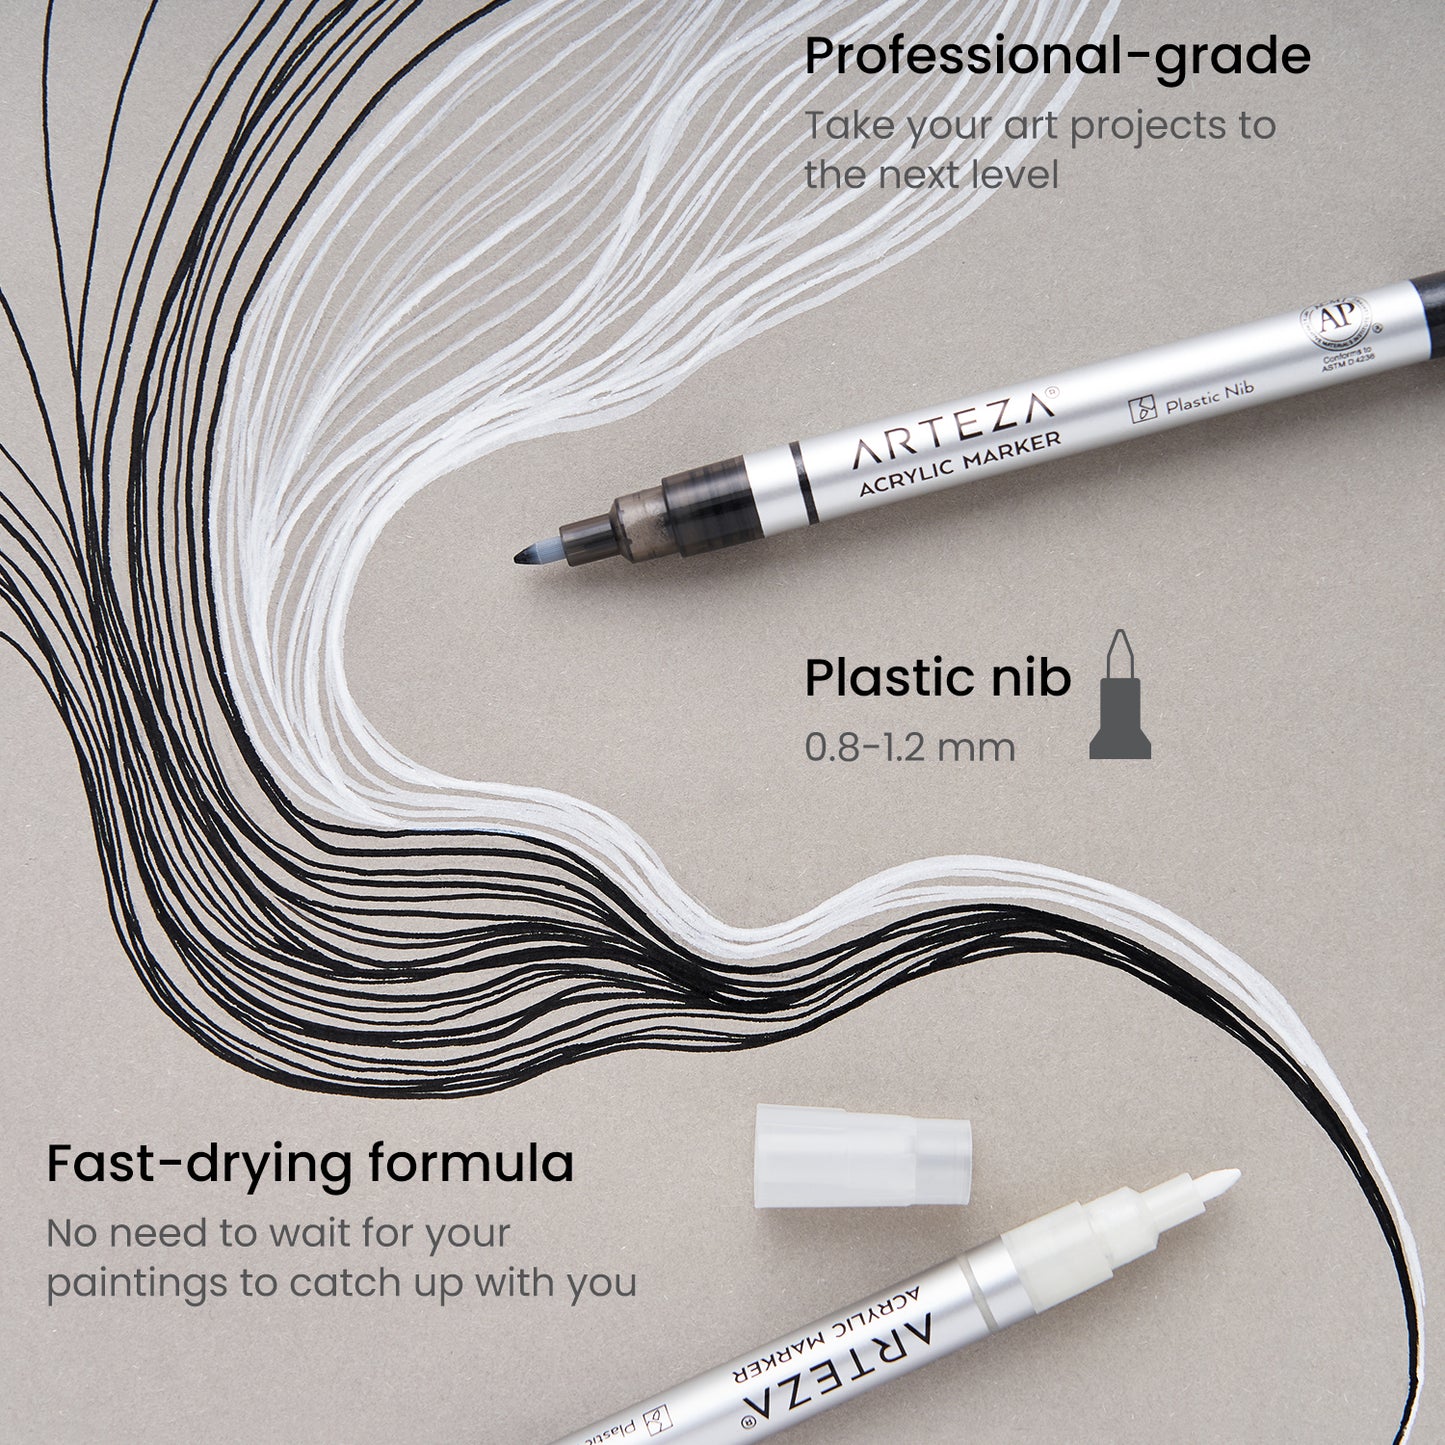 About the Professional Grade White Acrylic Markers